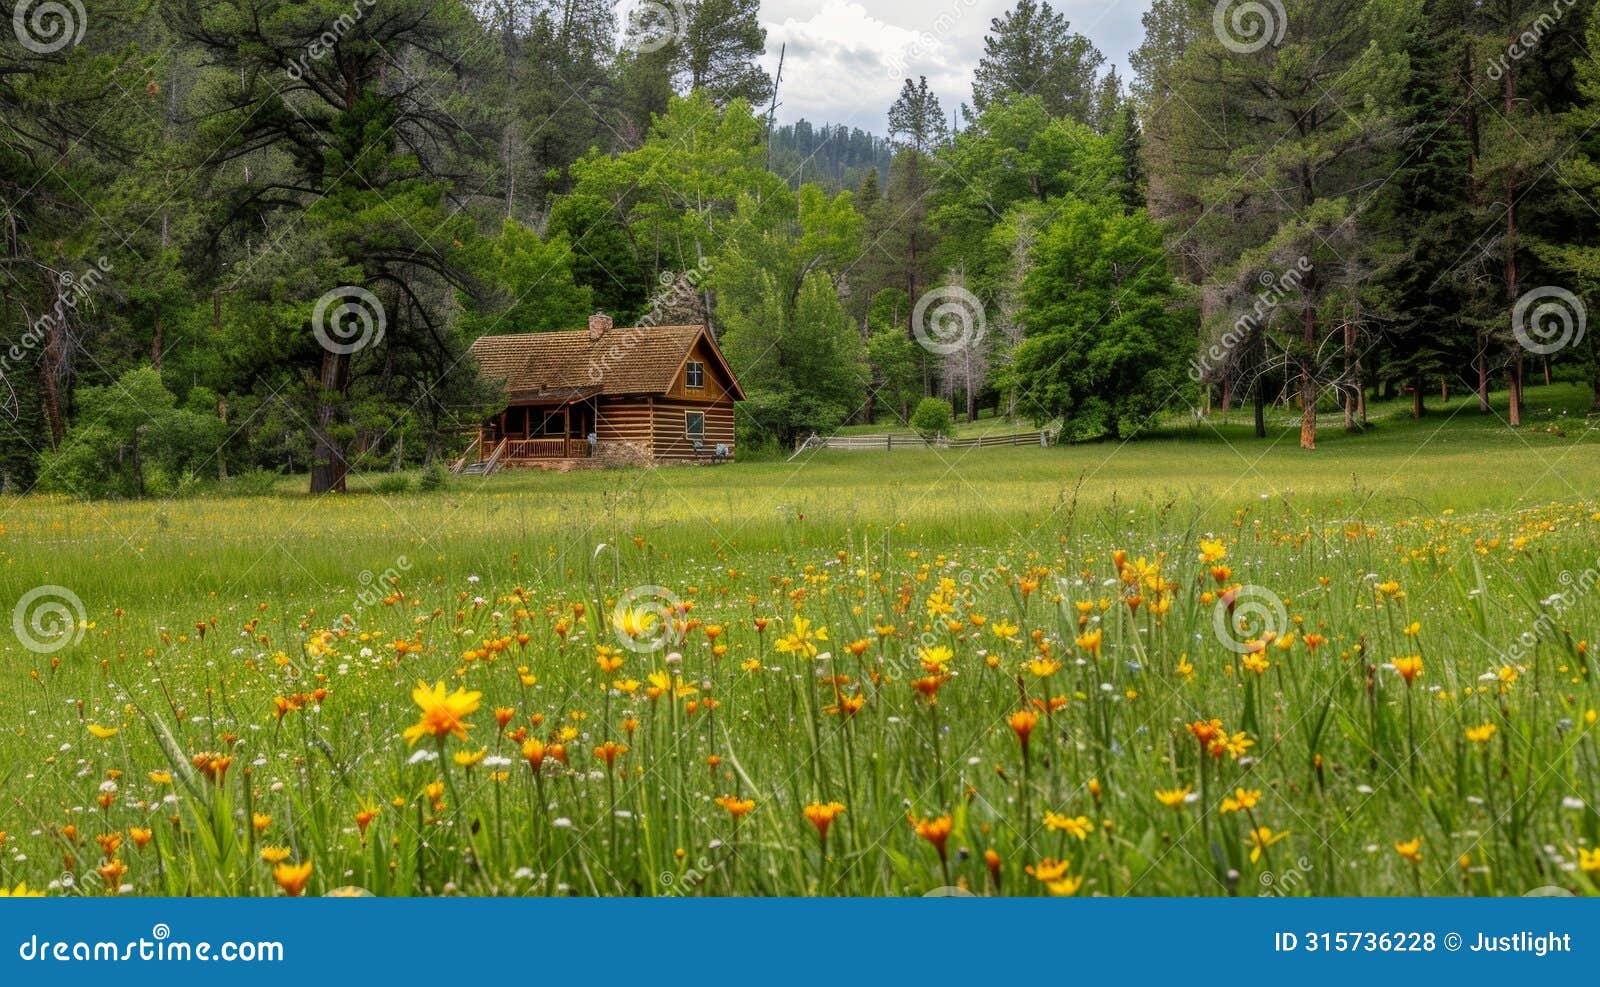 as you step out of your cabin you are greeted by a sprawling green meadow dotted with vibrant wildflowers. the cool dewy